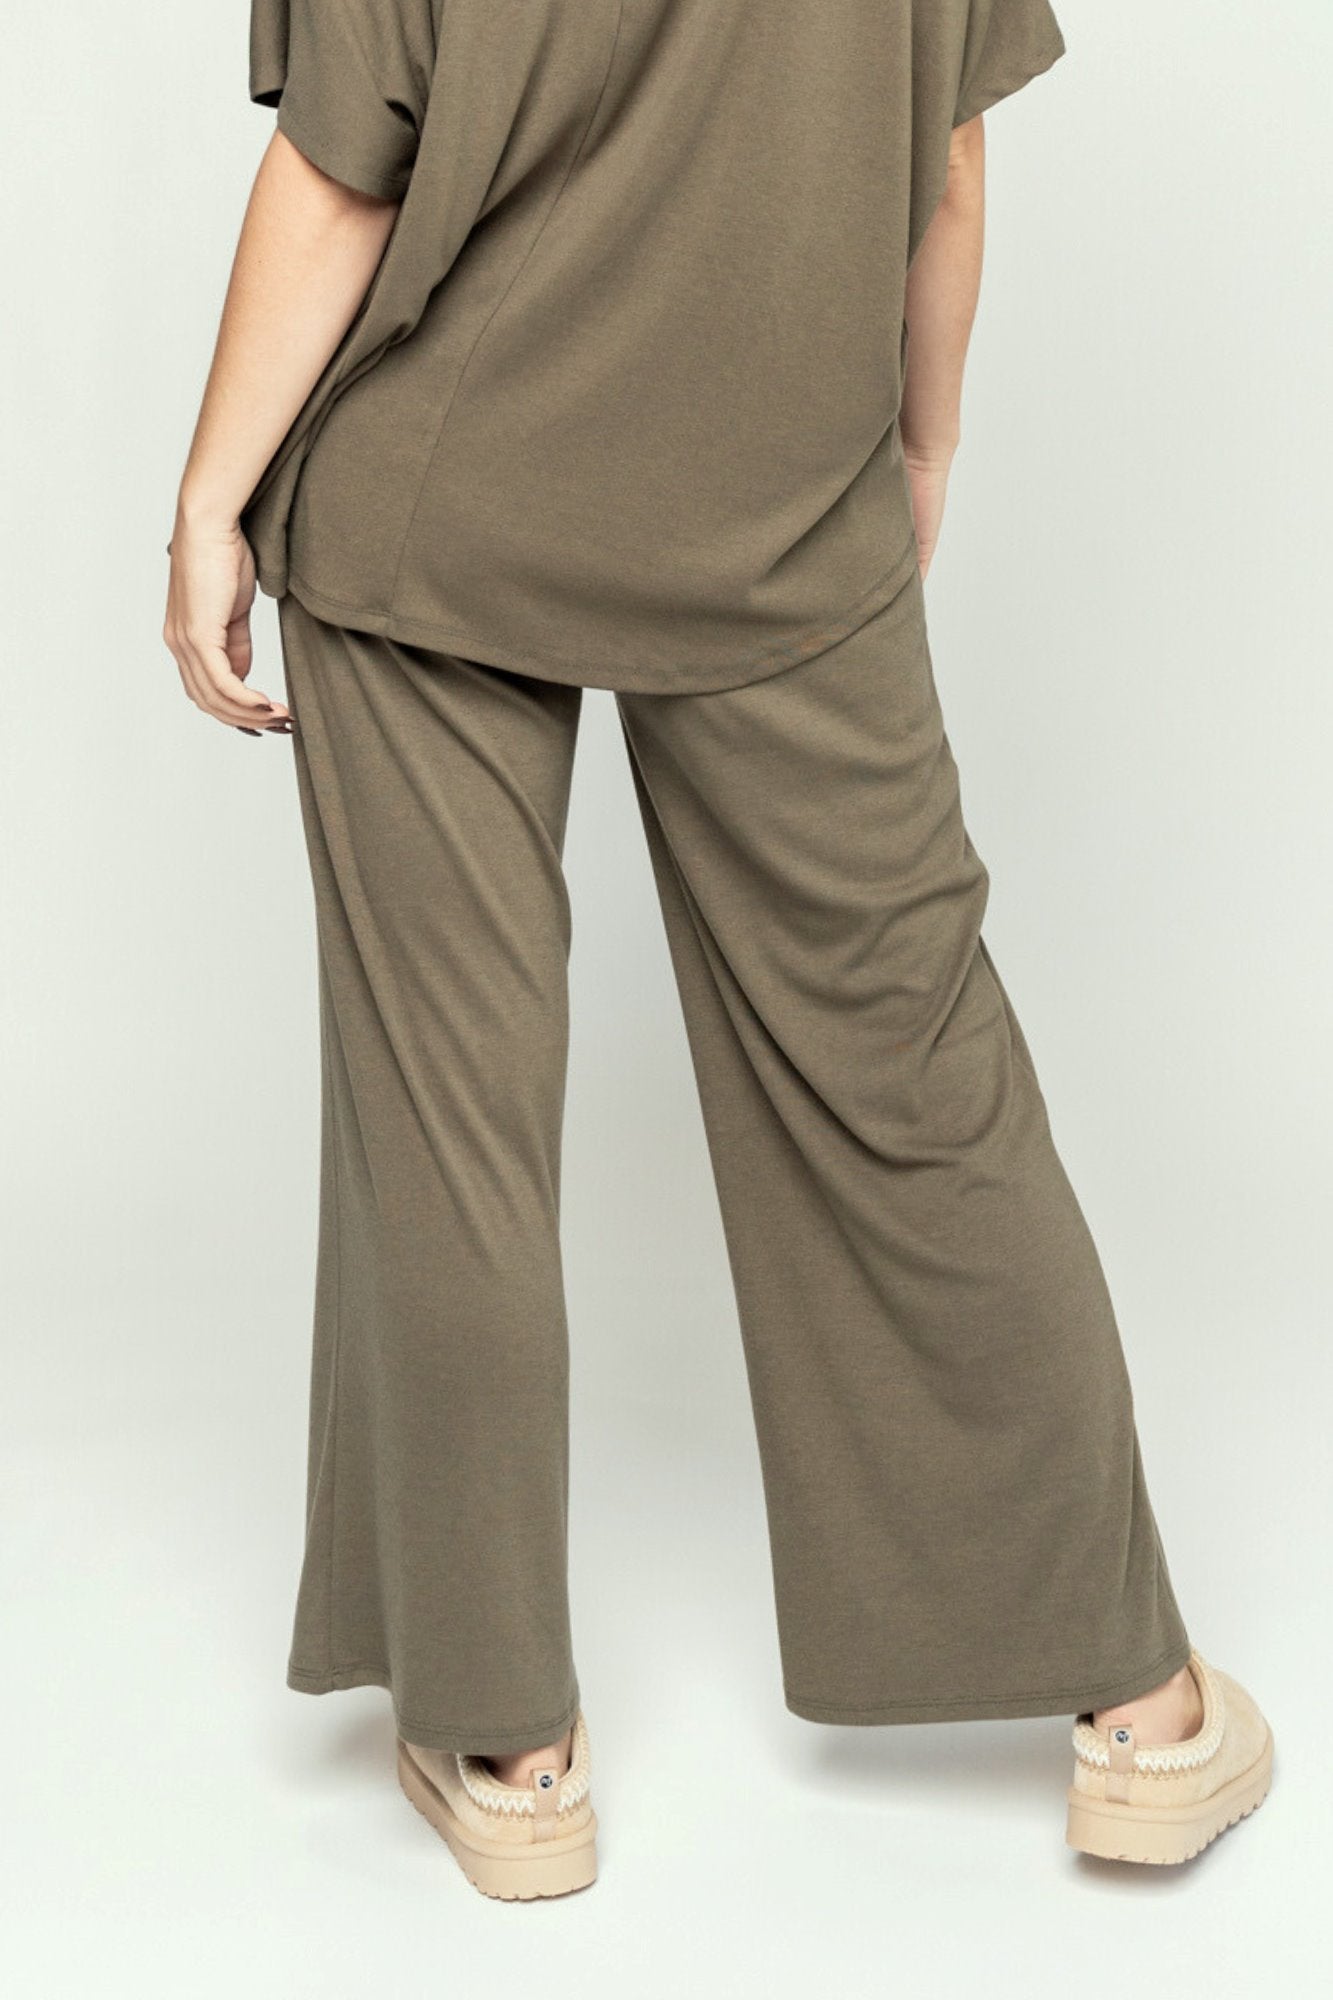 Travel Pant in Olive Holley Girl 